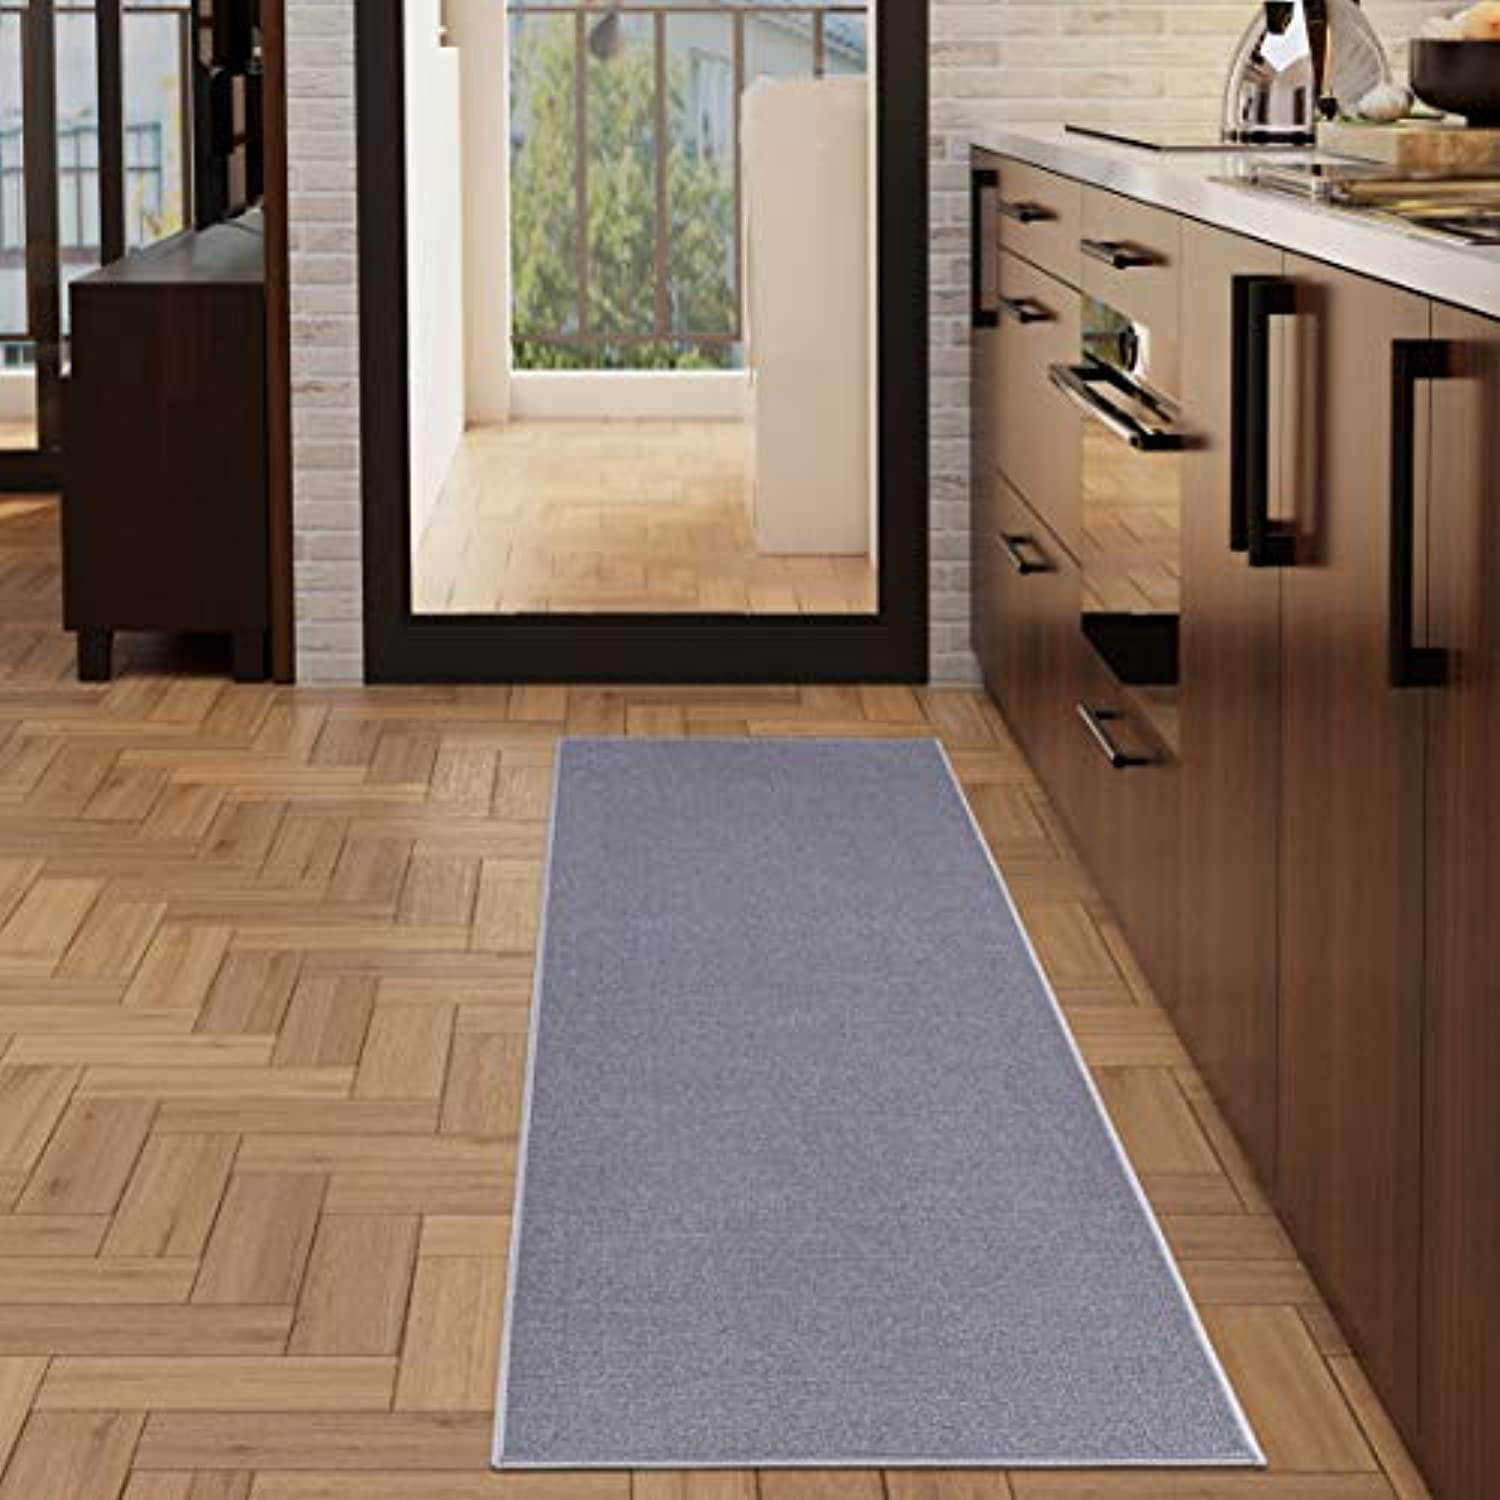 Beverly Rug Diego Solid Brown 20 in. x 59 in. Non-Slip Rubber Back Runner Rug